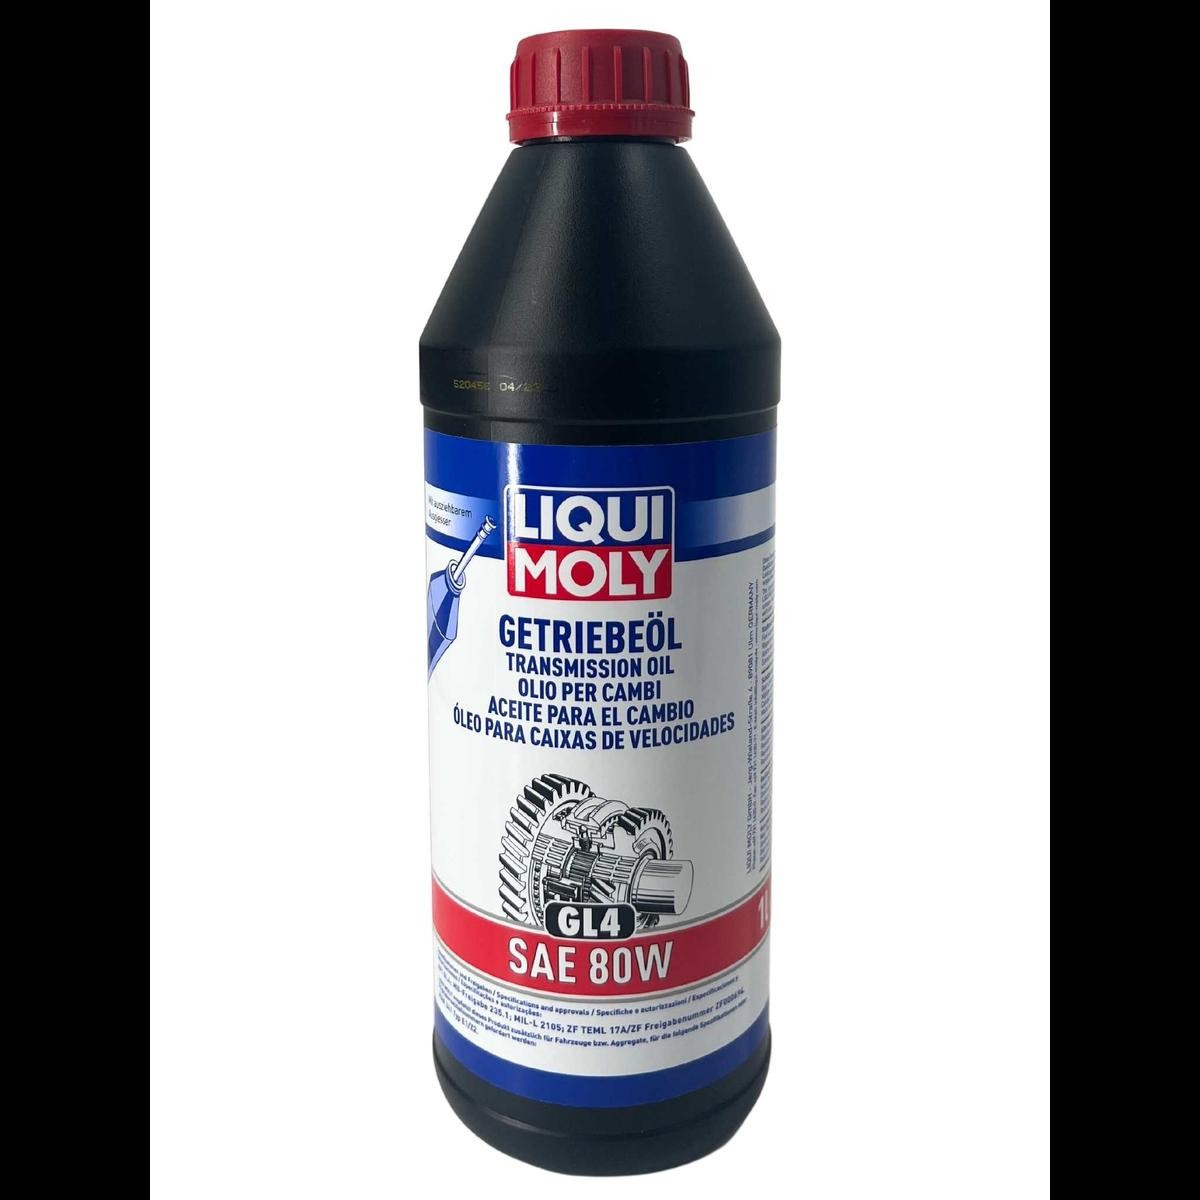 Ford FIESTA Oils and fluids parts - Manual Transmission Oil LIQUI MOLY 1020